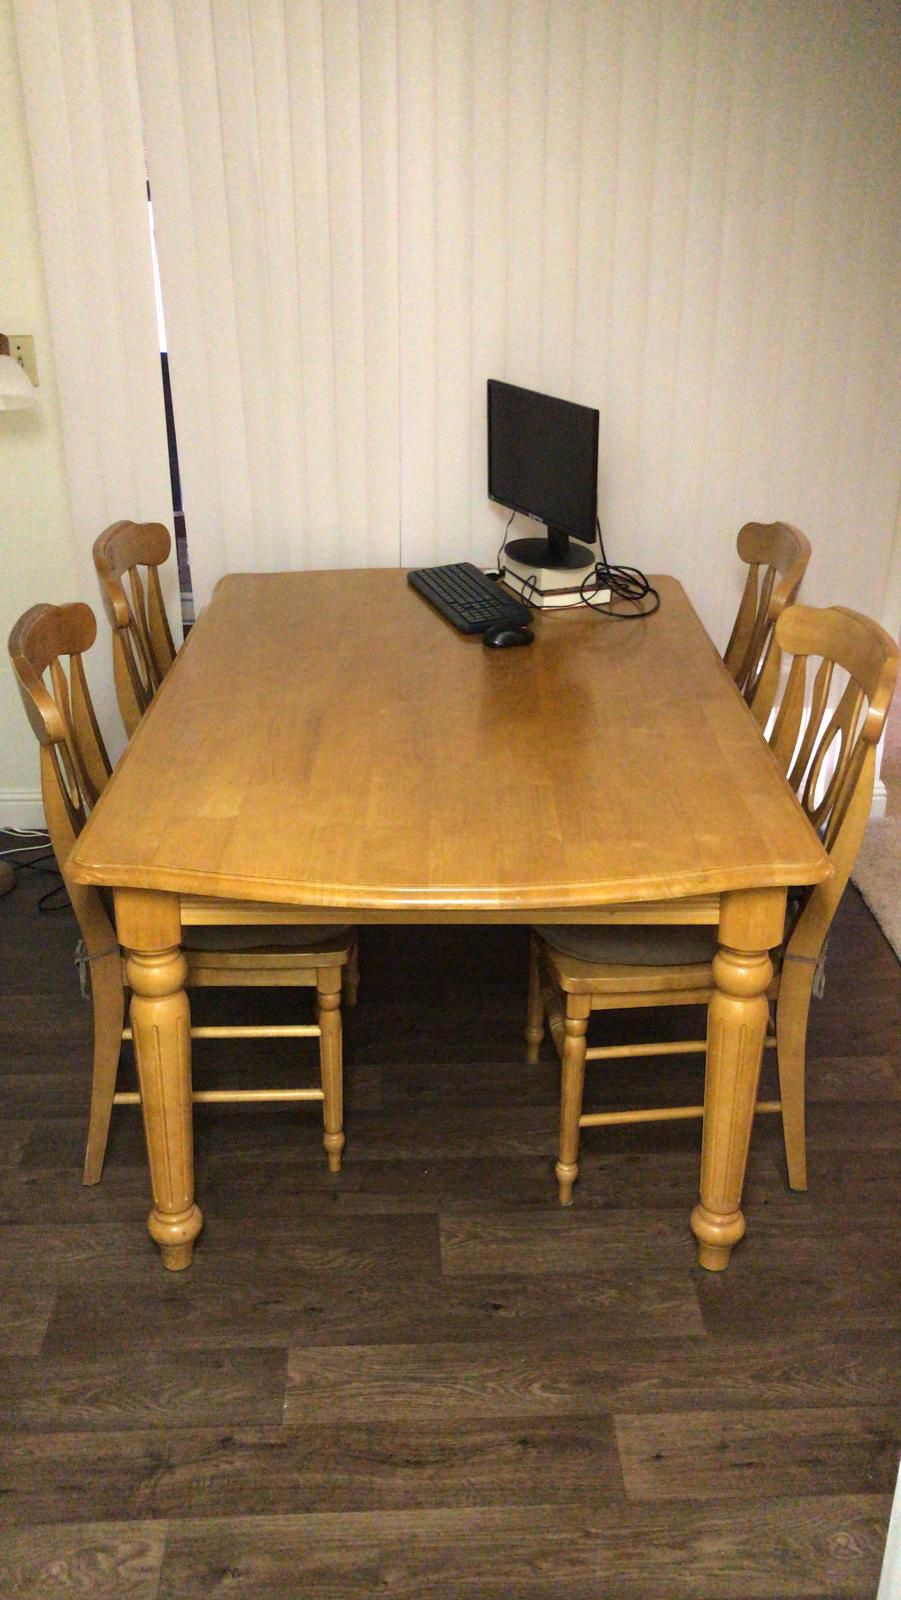 1 Dining Table And 4 Chairs (wooden)